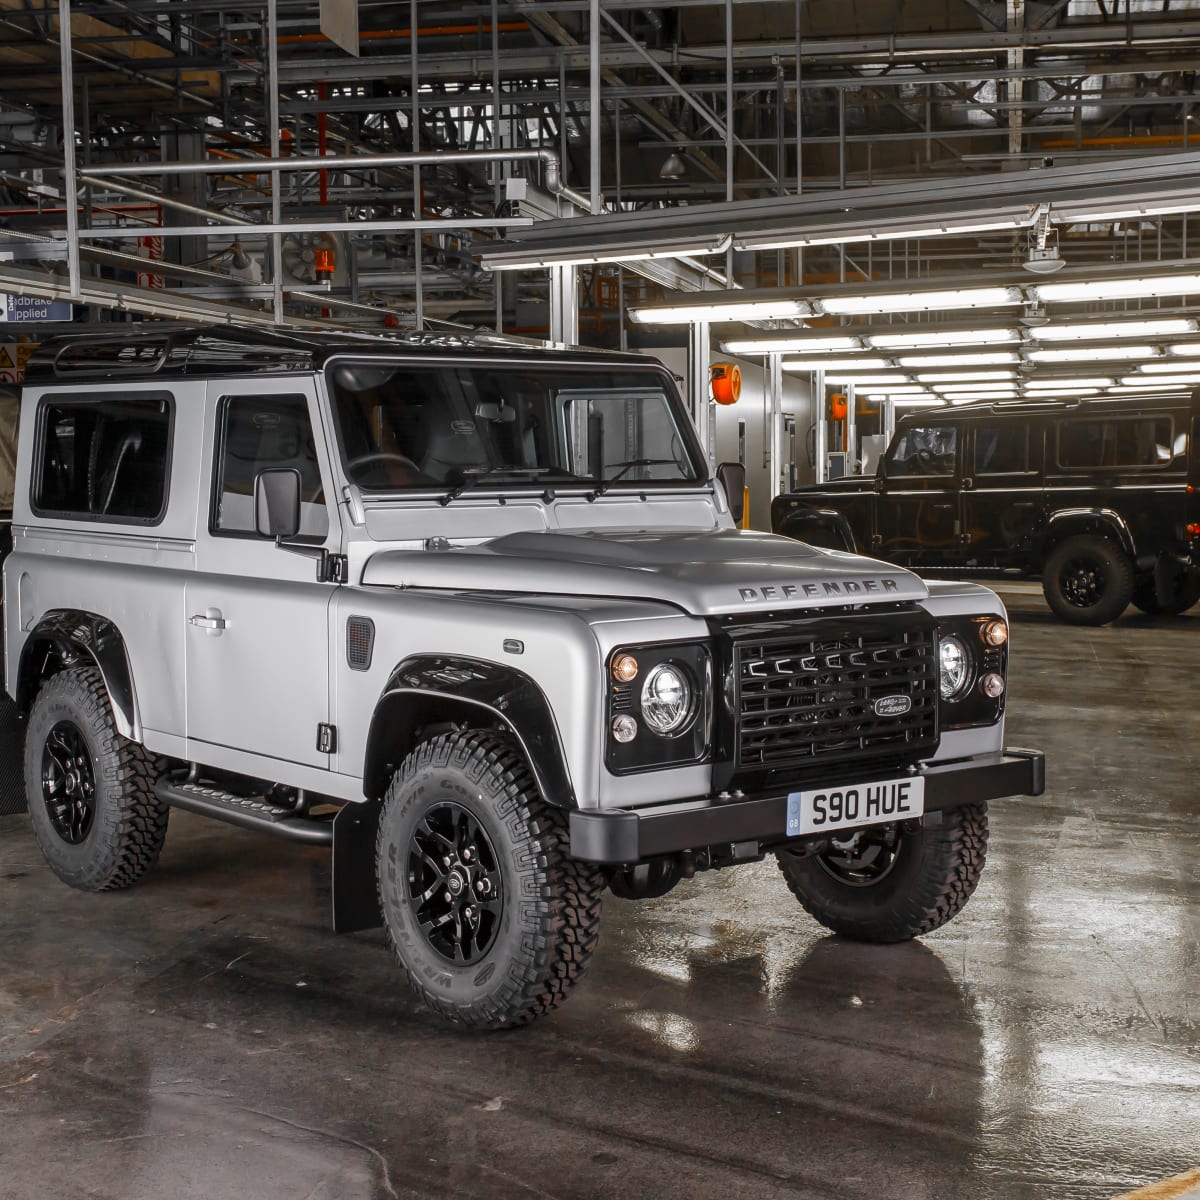 2015 Rewind | Land Rover builds the 2,000,000th -